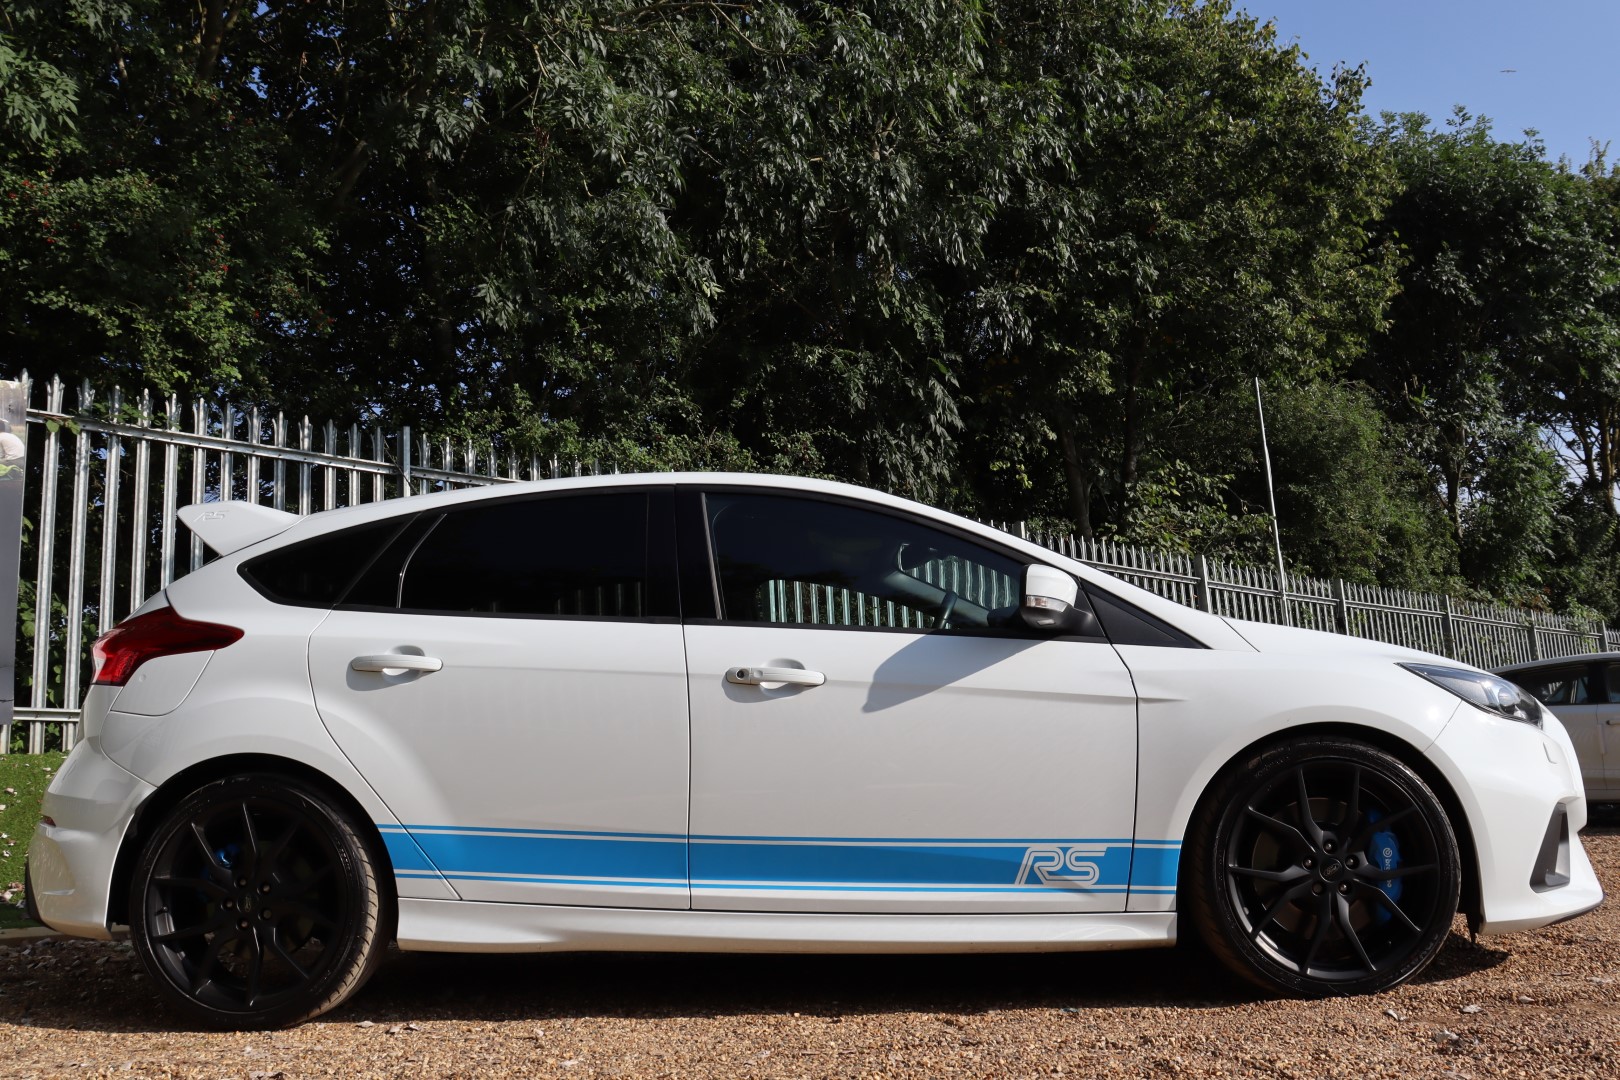 Focus RS for sale